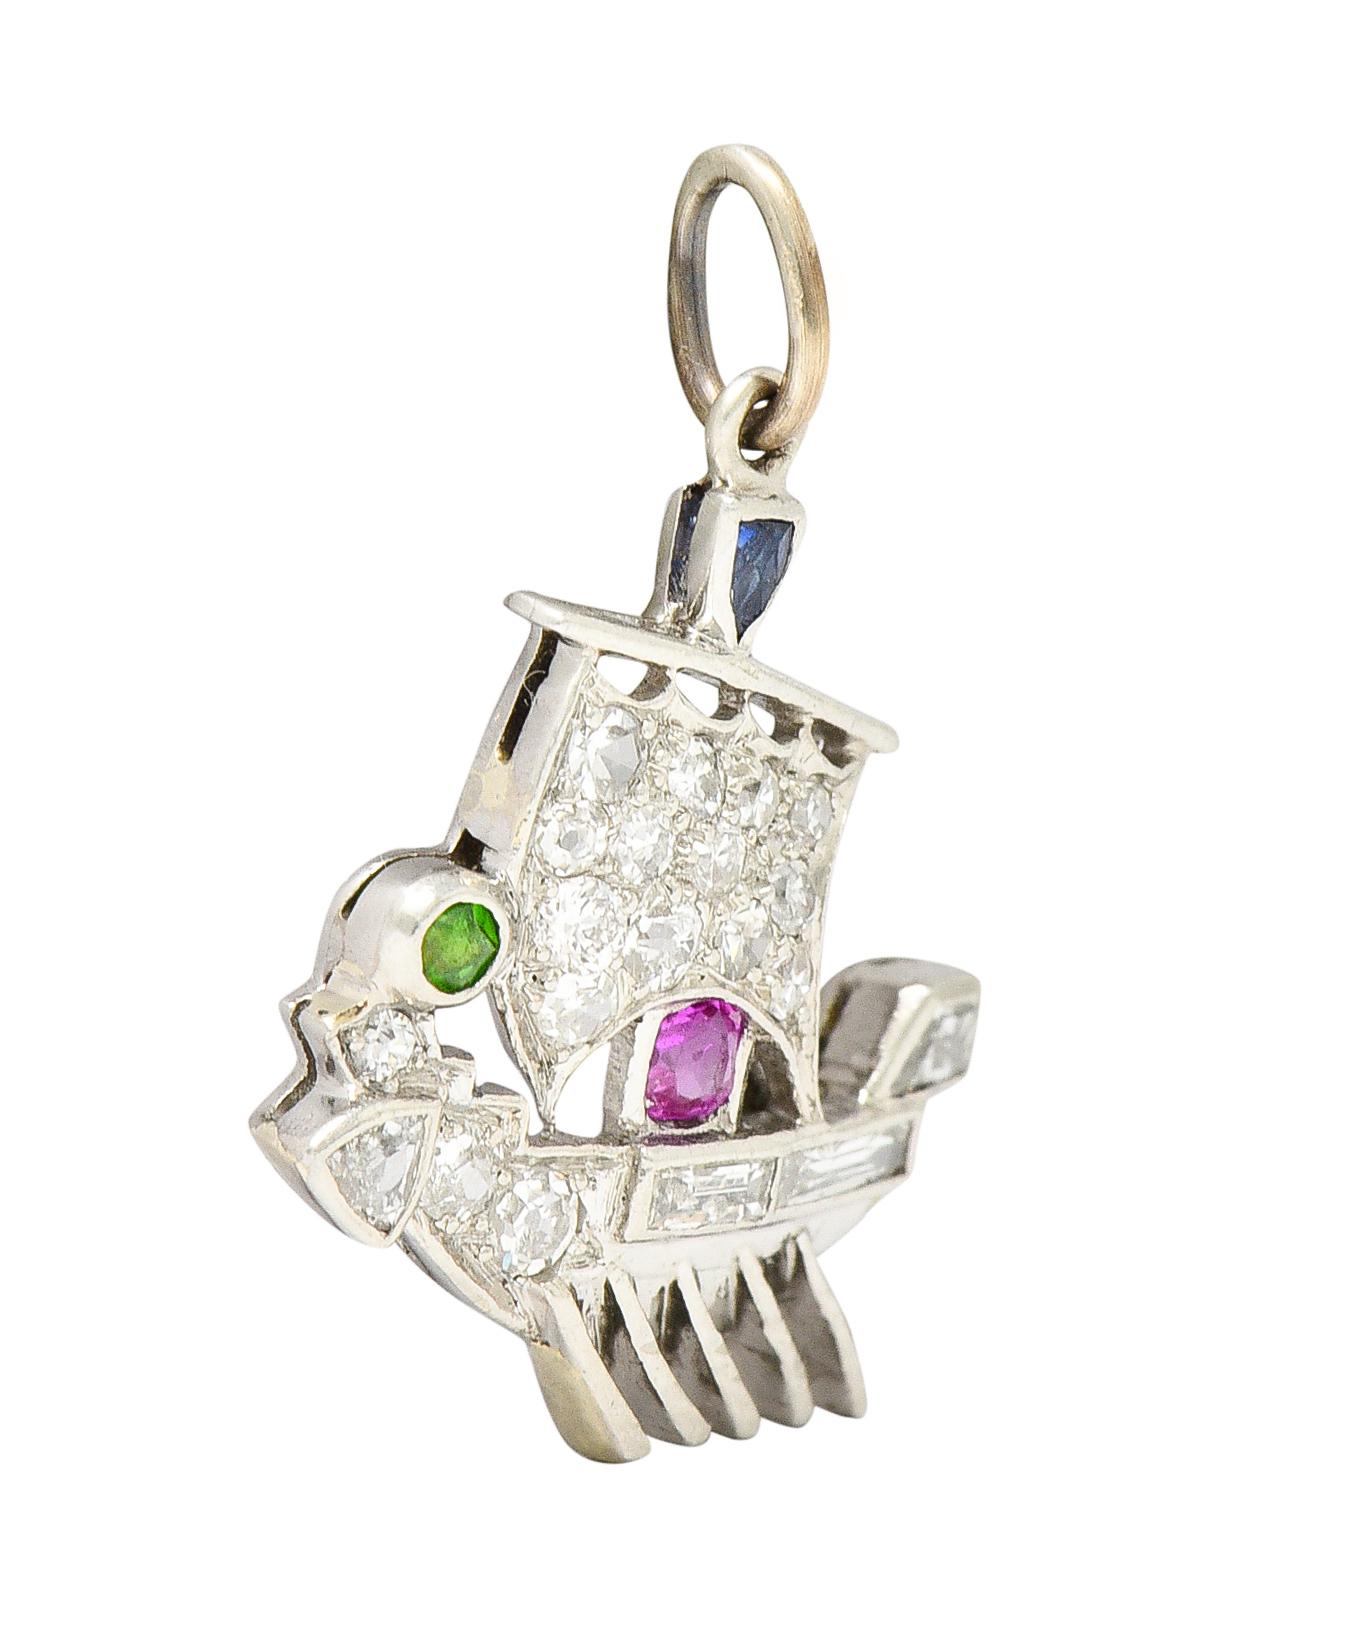 Charm is designed as a geometrically styled Viking longboat with a cast sail and angled rowing paddles. Featuring calibrè cut accents of a red ruby, blue sapphire, and bright green demantoid garnet. Set throughout by baguette and old single cut